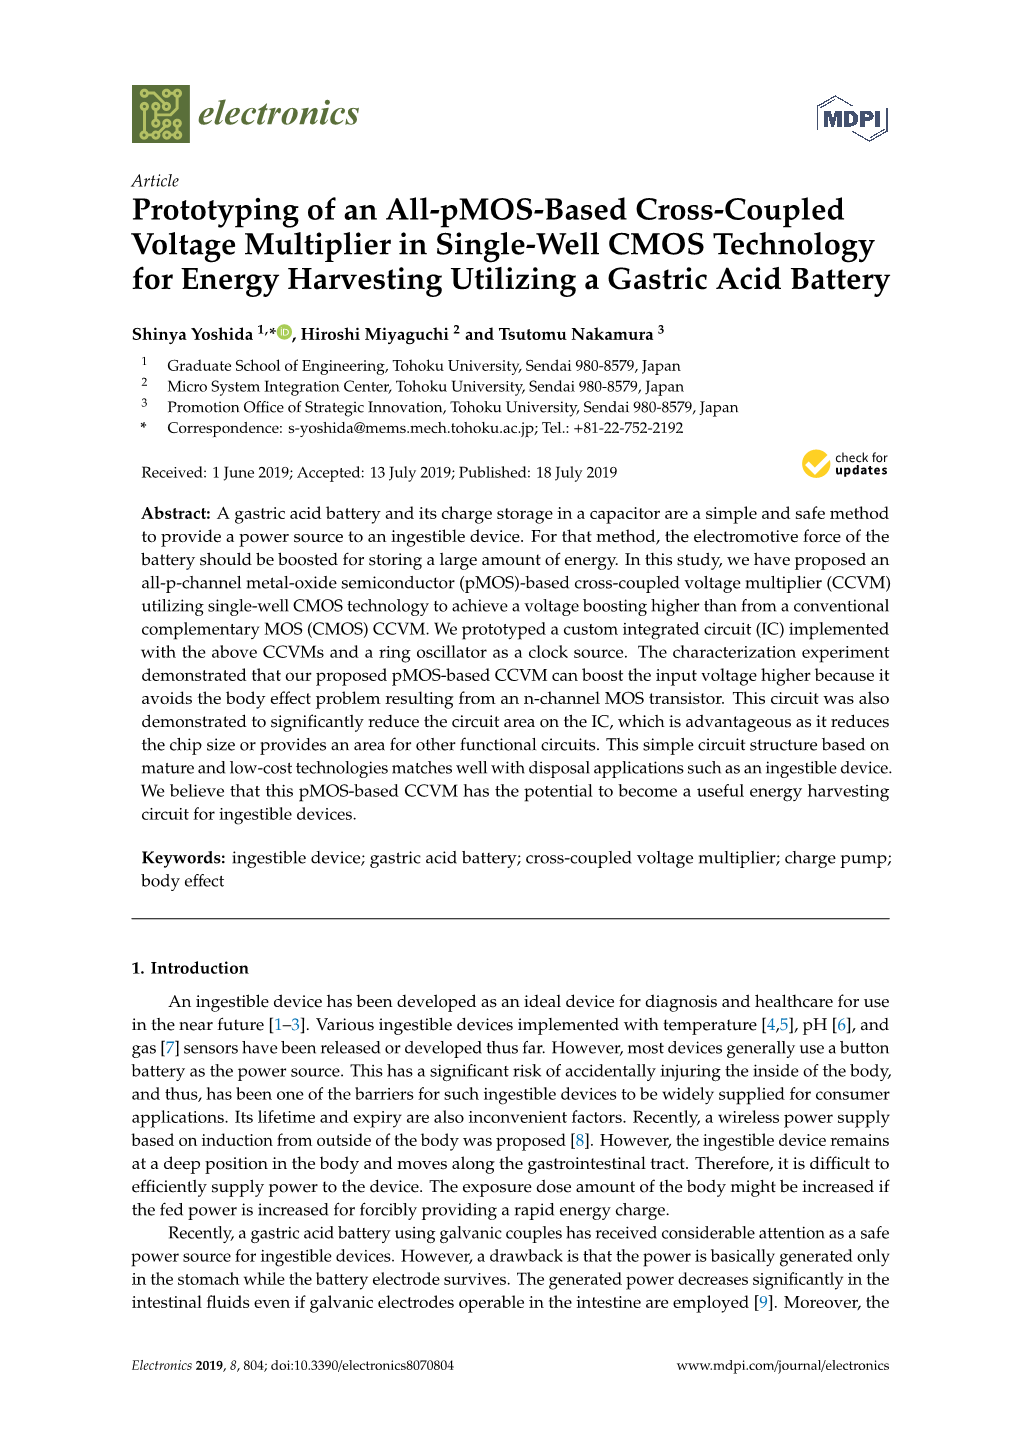 Prototyping of an All-Pmos-Based Cross-Coupled Voltage Multiplier in Single-Well CMOS Technology for Energy Harvesting Utilizing a Gastric Acid Battery